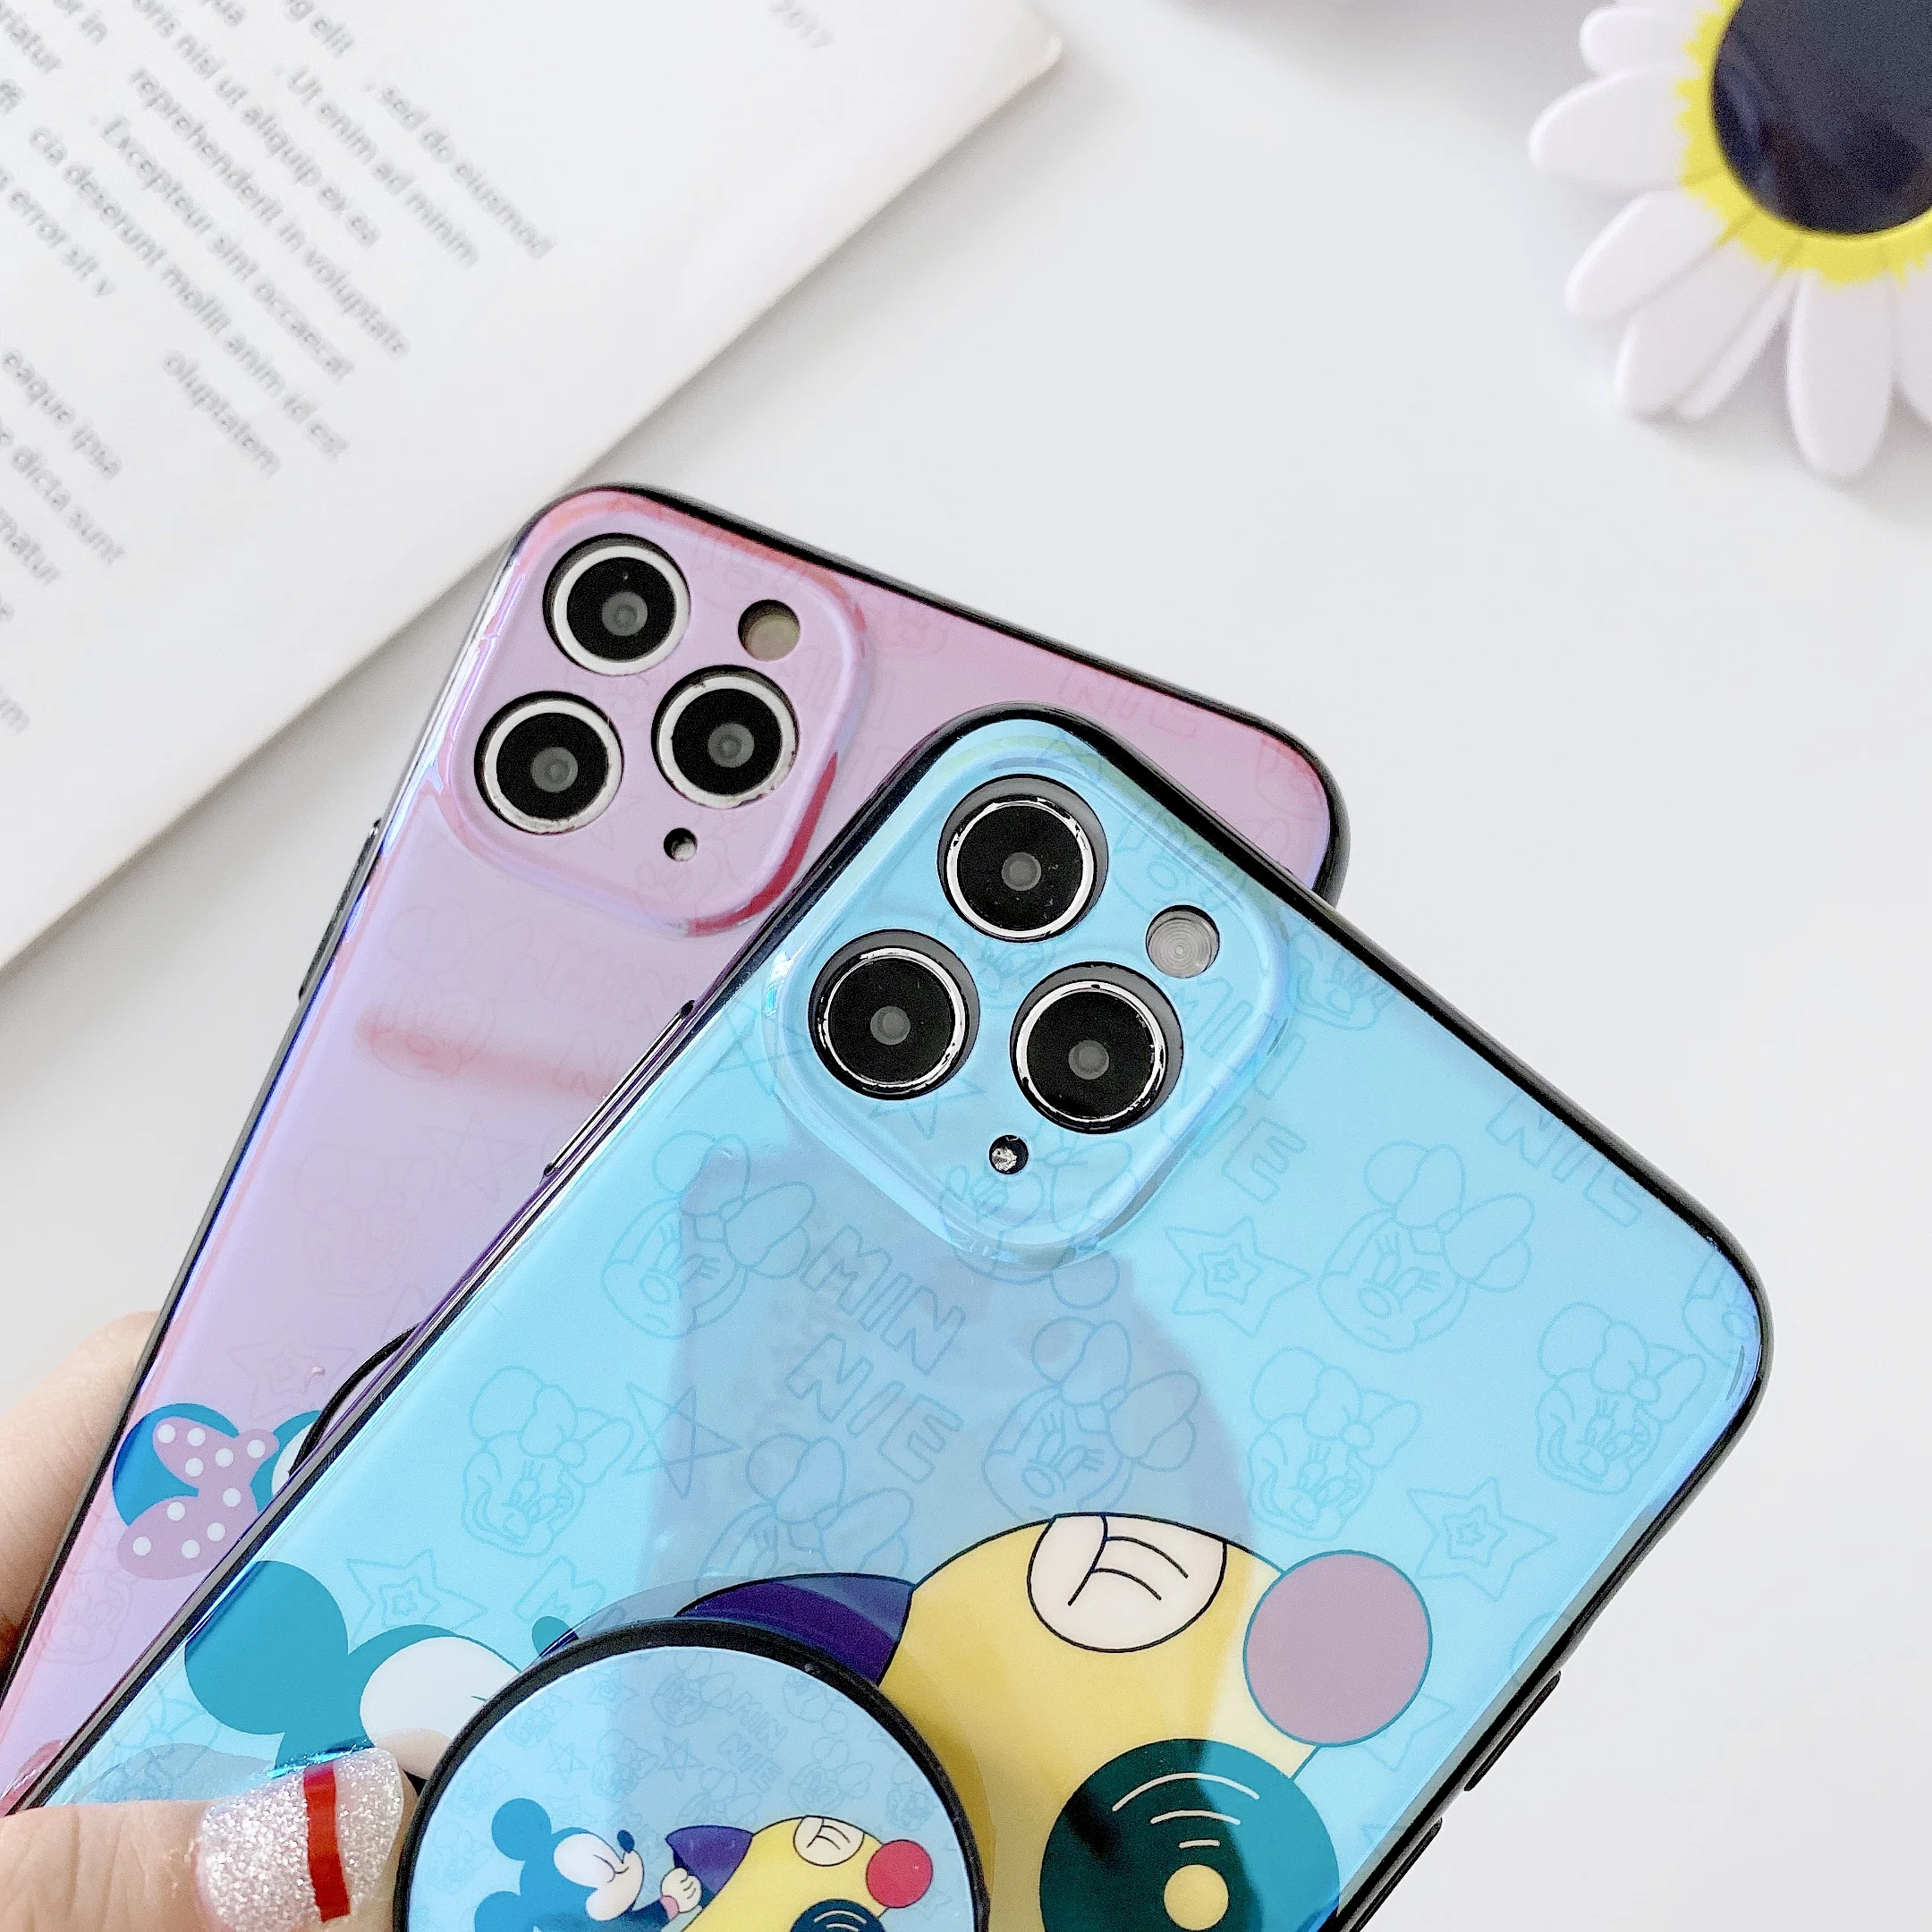 

Blue Ray Anime Phone Case for Redmi 9A 9C 9T 8A 7A 6A 6 Pro 5 Plus K20 K30 Note 4X 8T 9S Phone Case Cartoon Soft Silicone Coque